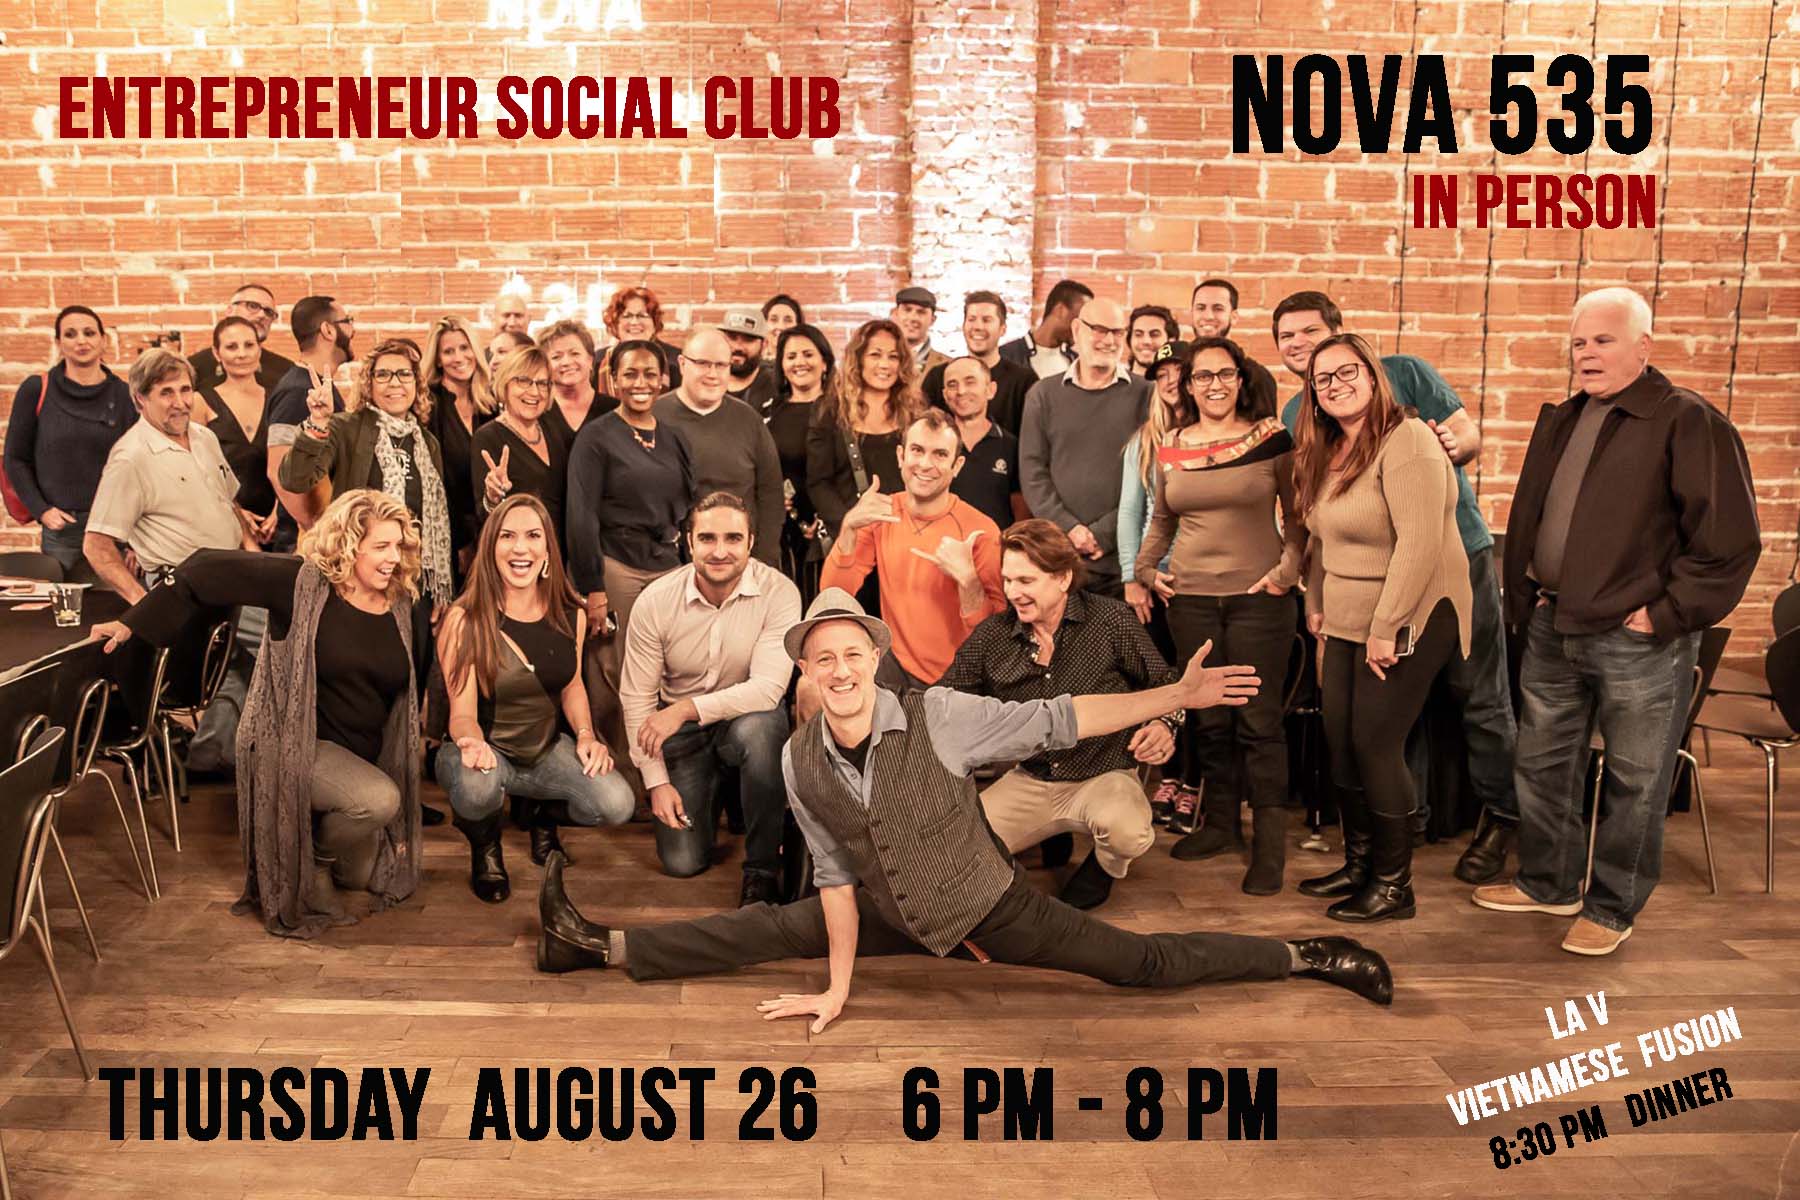 2021 08-26 Entrepreneur Social Club at NOVA 535 in downtown St. Pete 6 to 8pm every Thursday